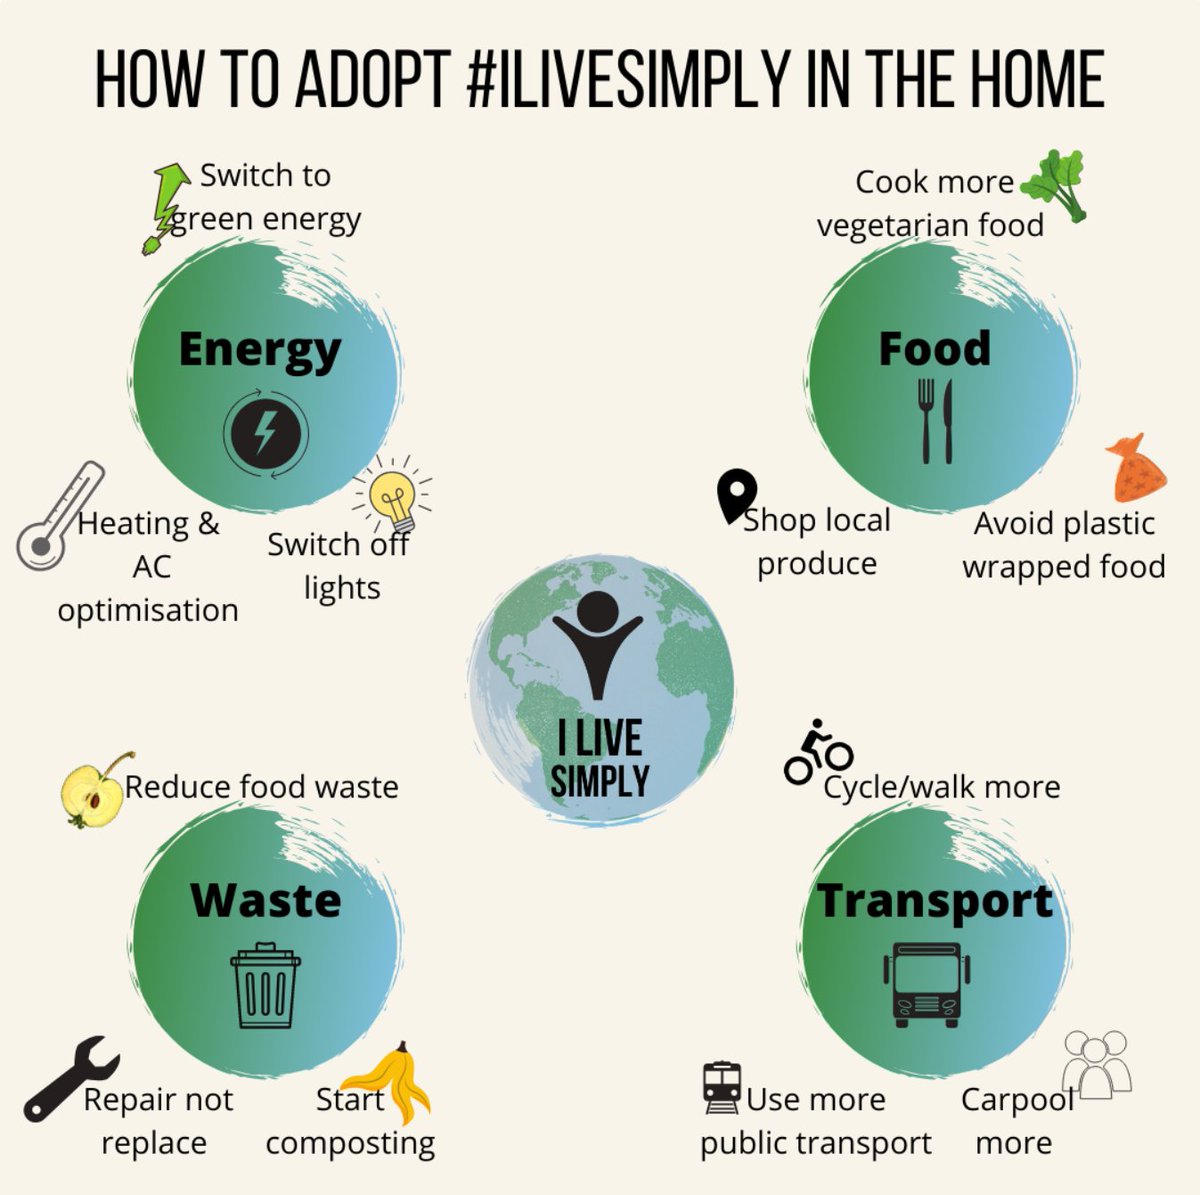 Please checkout @IlivesimplyM , a wonderful initiative from Ladakh, India that encourages personal and corporate pledges for reducing carbon footprints. Please follow us on our Instagram page-instagram.com/dpogreenimpact/ #ilivesimply #Sustainability #carbonfootprint #gogreen